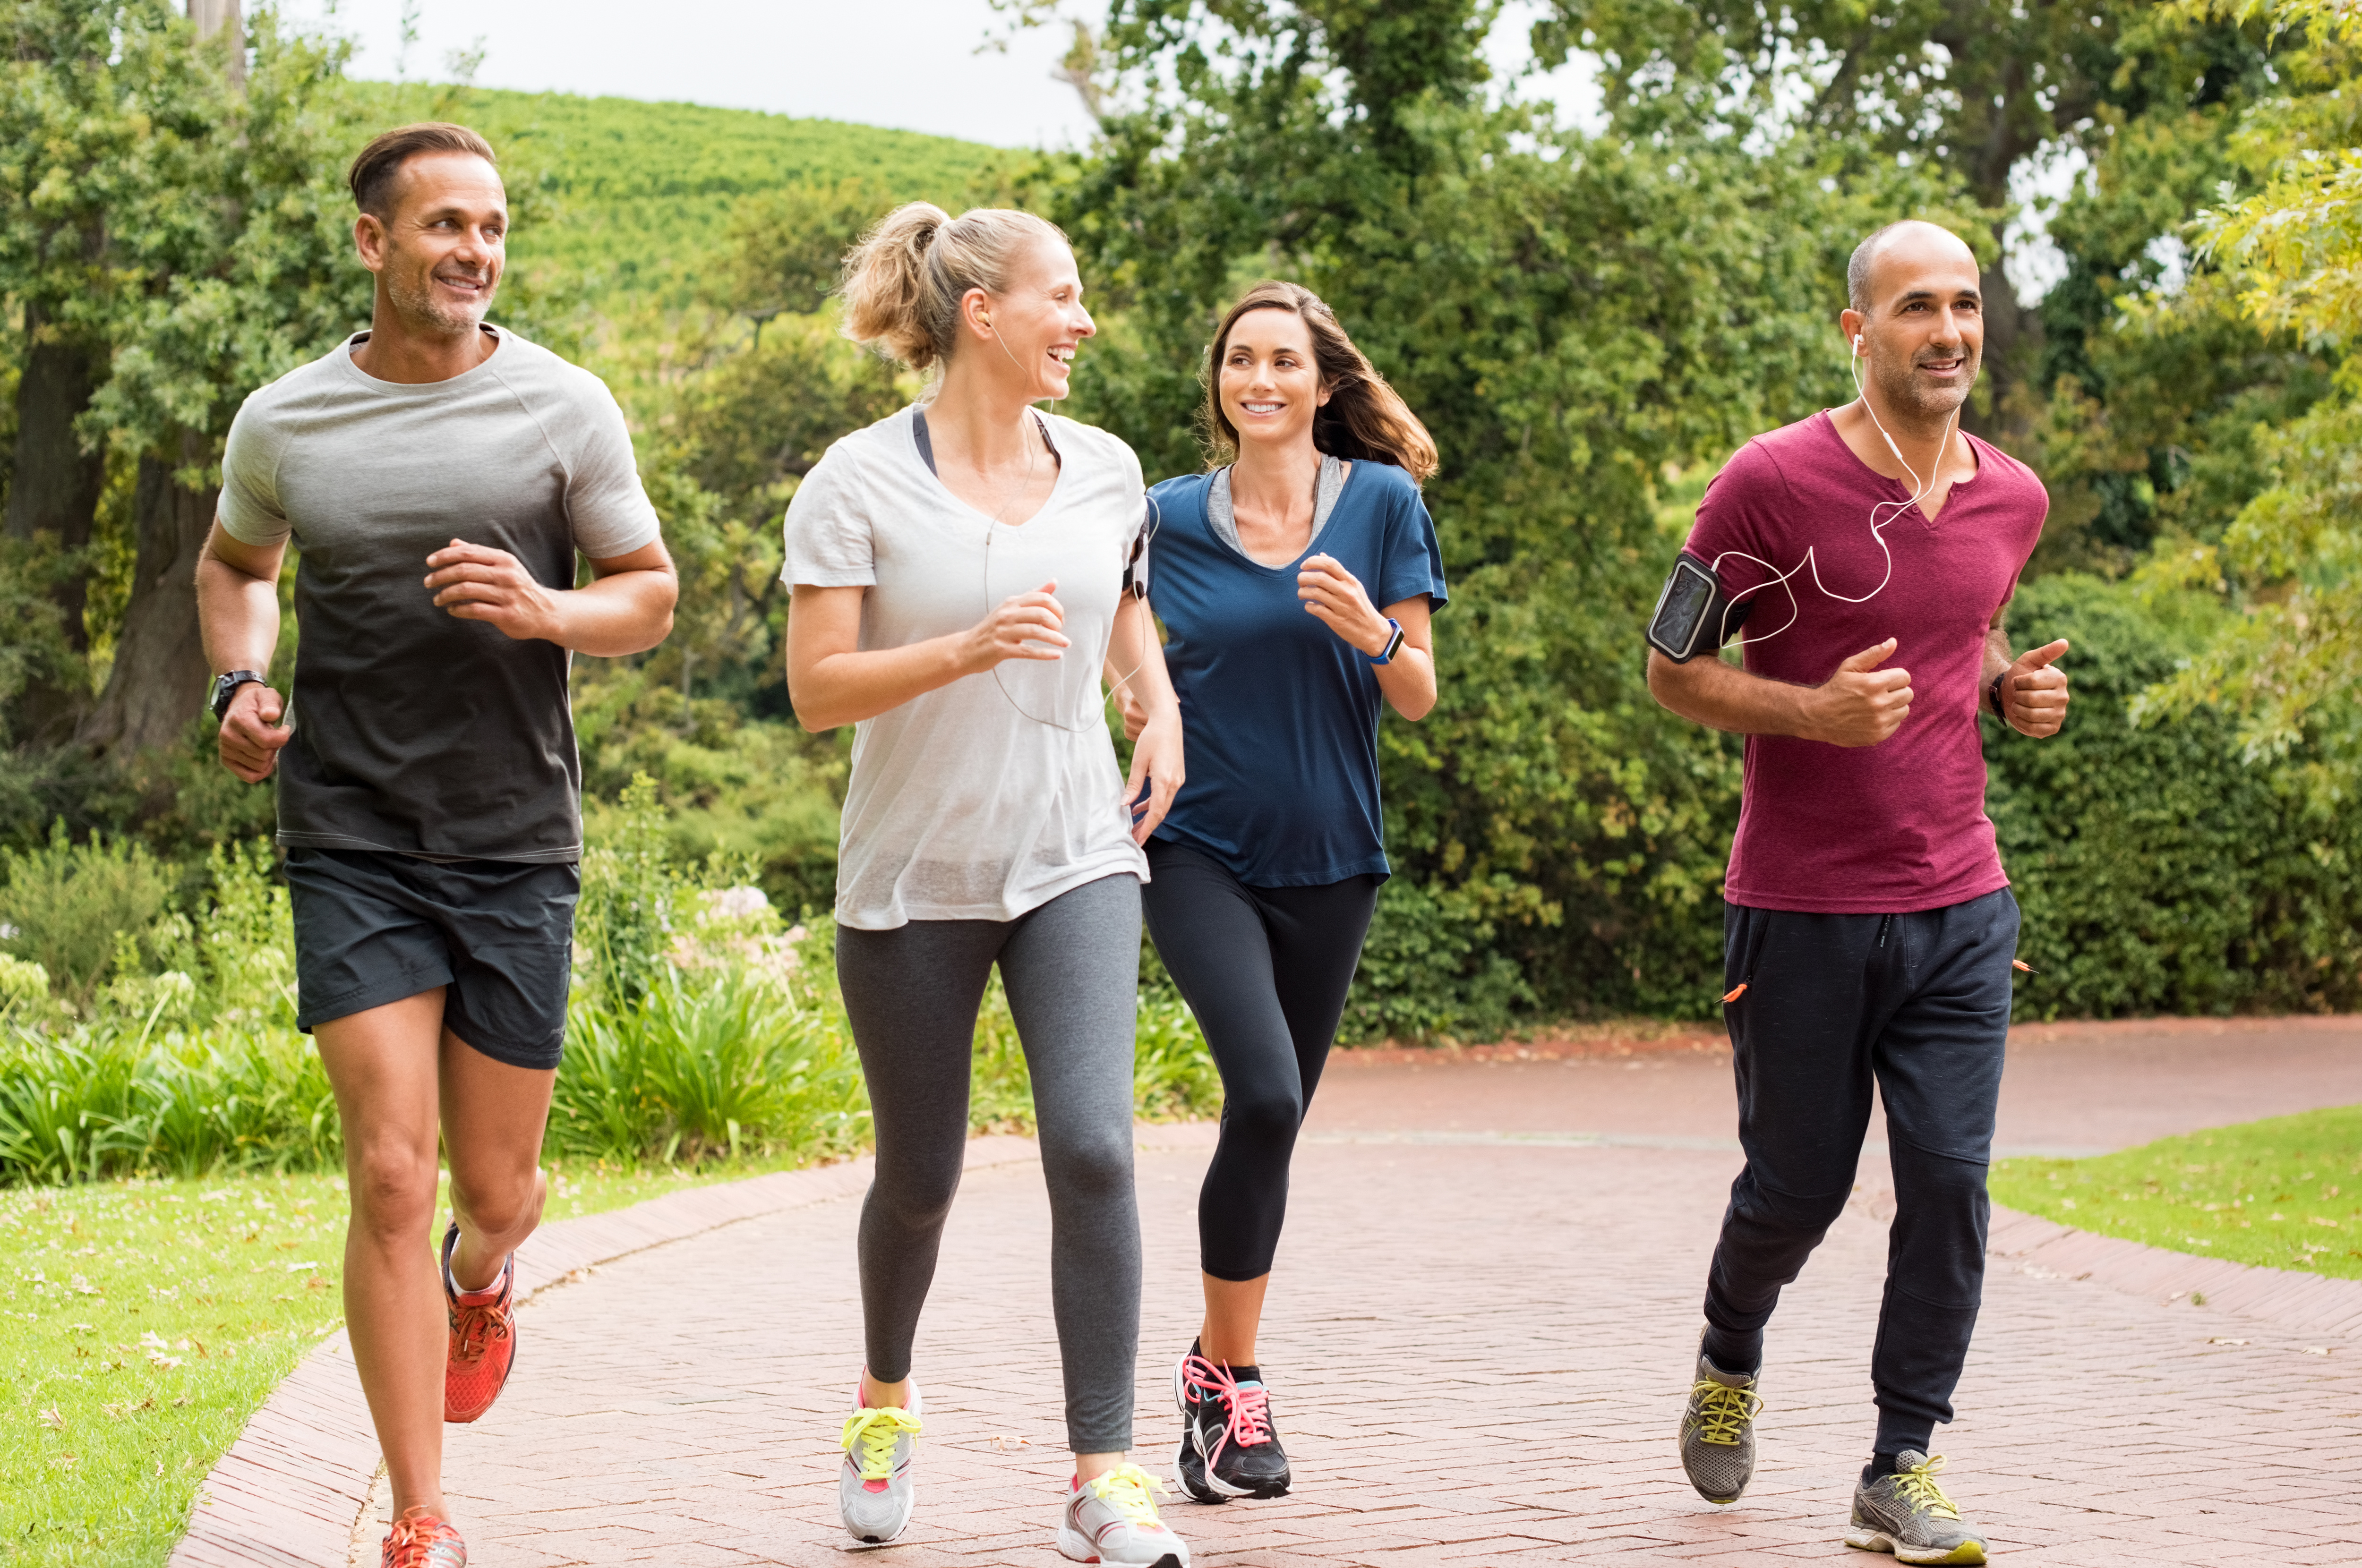 Healthy group of people jogging on track in park. Happy couple enjoying friend time at jogging park while running. Mature friends running